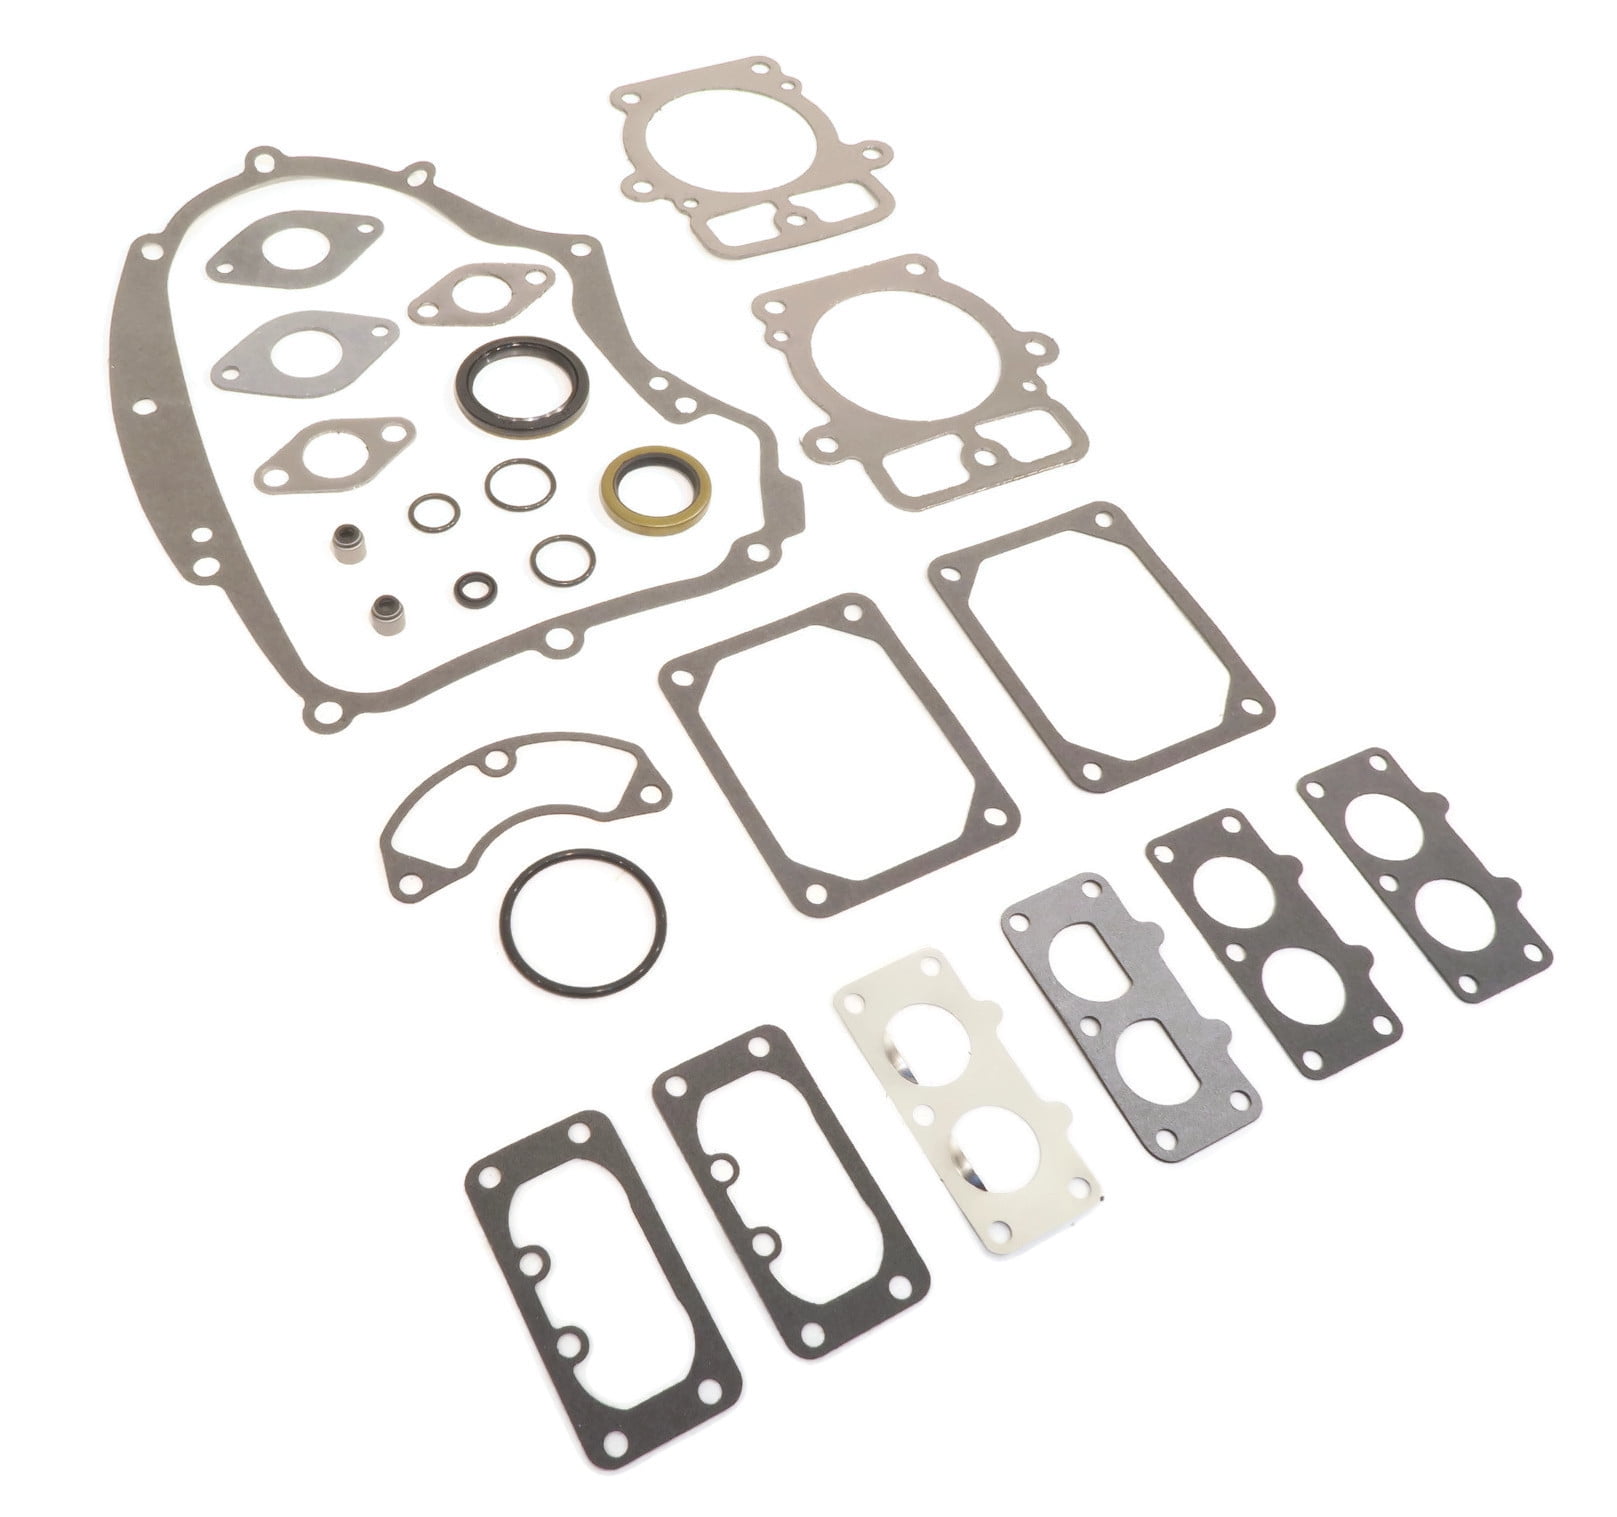 New for Briggs & Stratton 694012 Engine Gasket Set Replaces 499889 US Fast Ship 